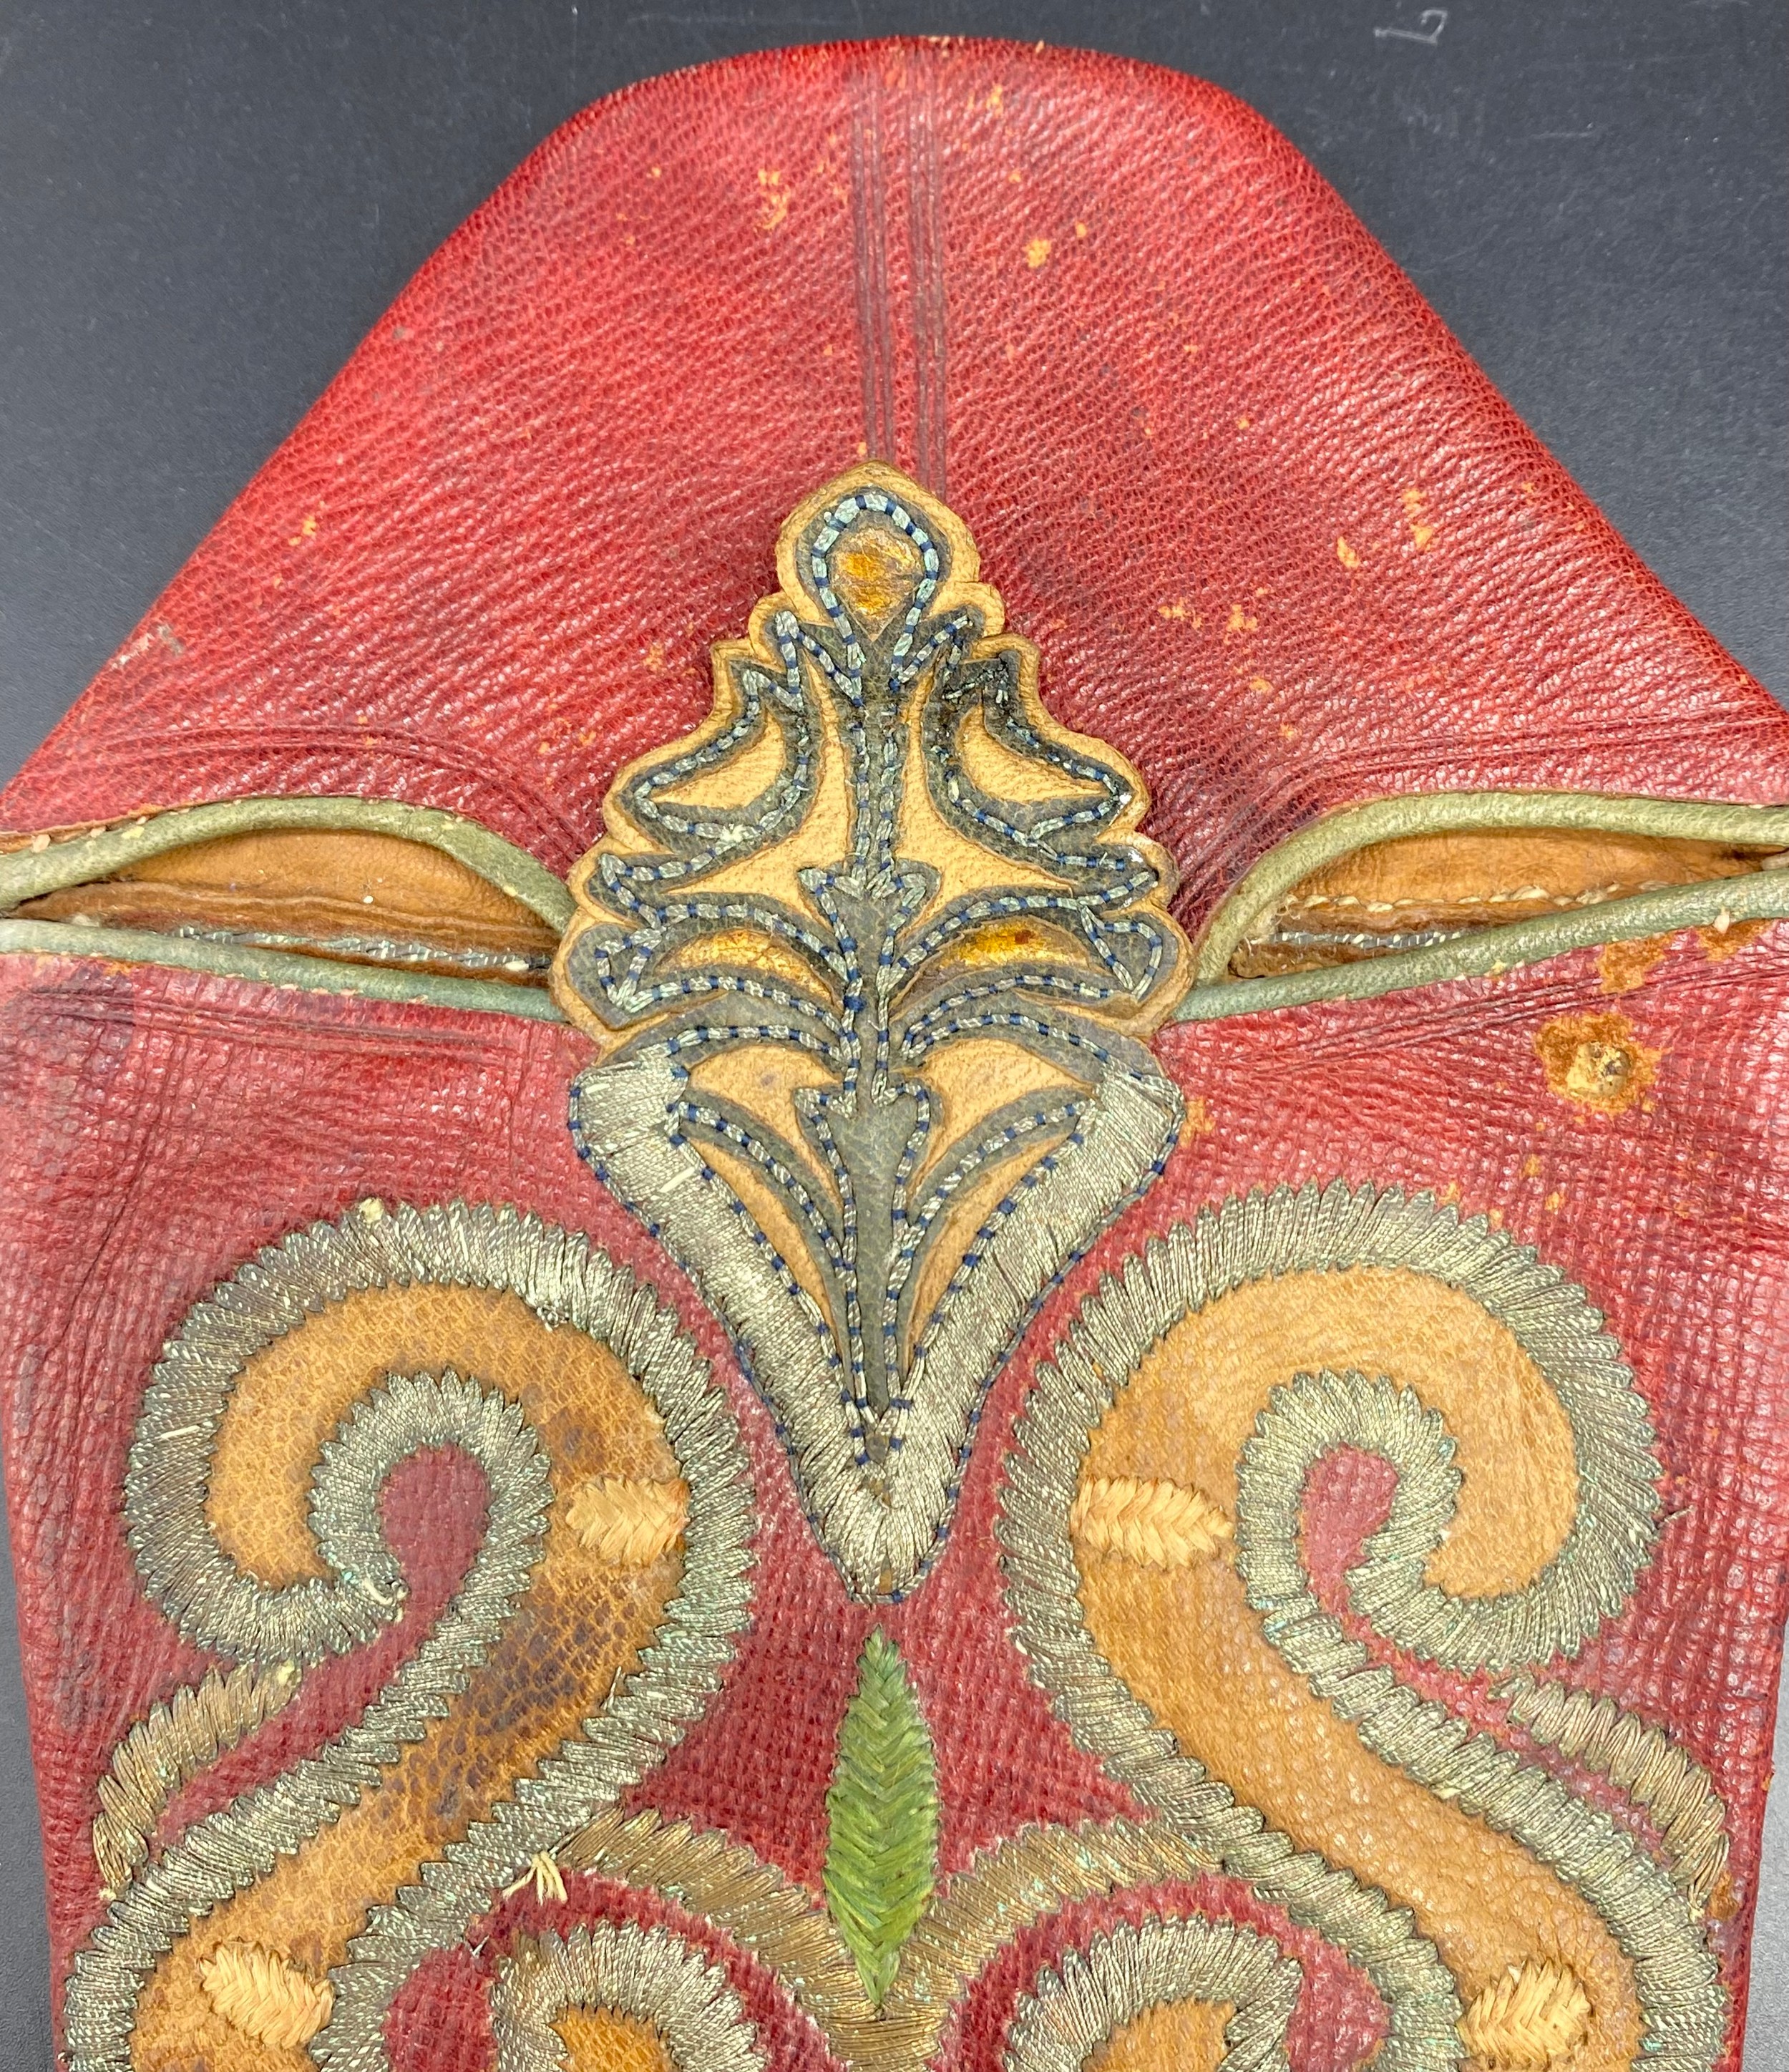 A pair of 19th century Turkish or Ottoman embroidered slippers - Image 4 of 5